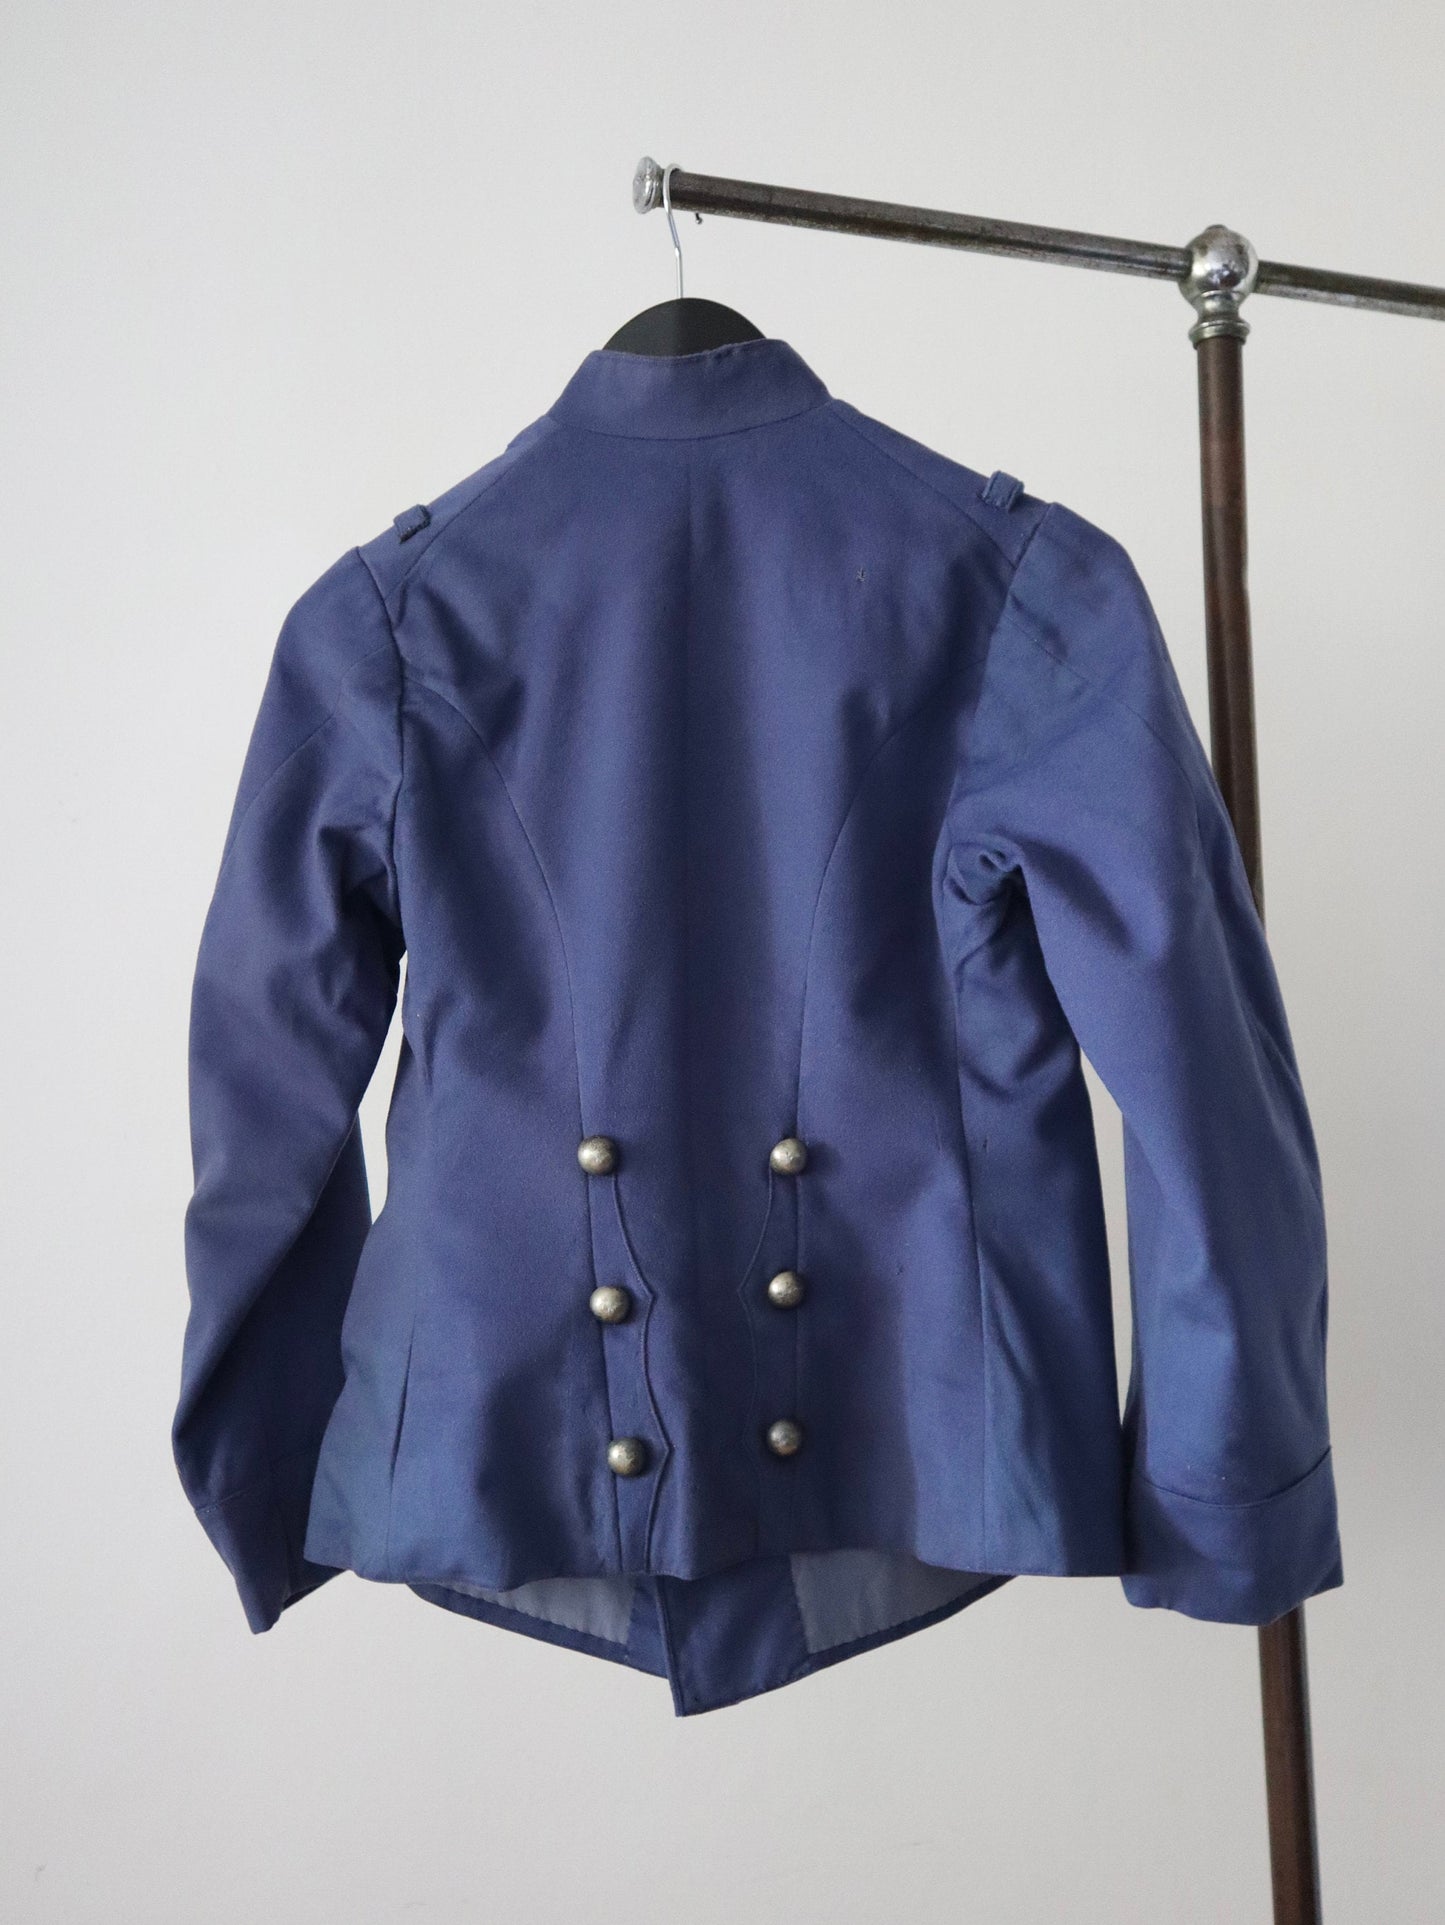 1930s French Jacket Blue Wool Military Style Theatre Costume Blue Wool